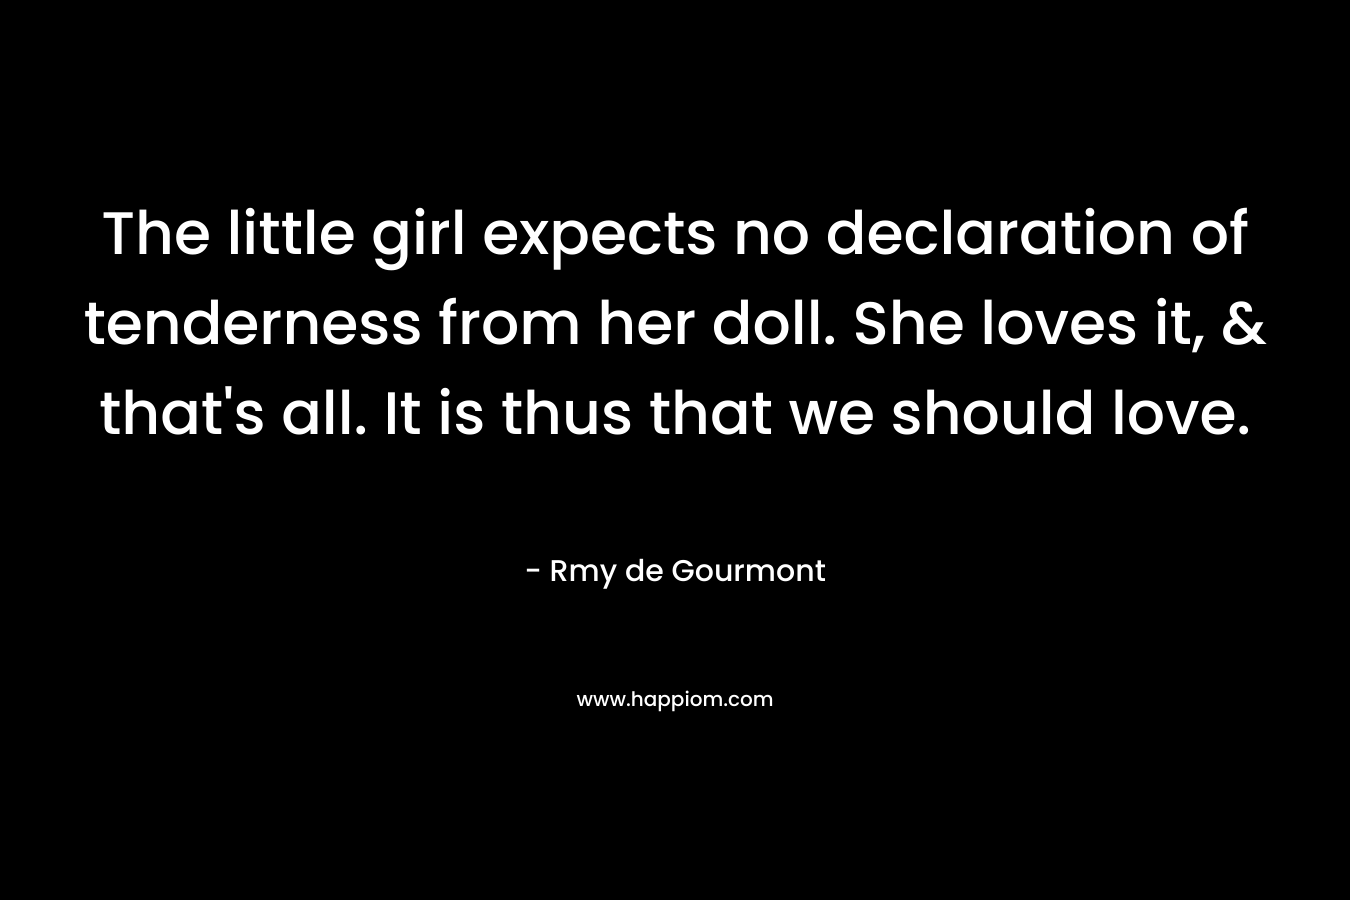 The little girl expects no declaration of tenderness from her doll. She loves it, & that’s all. It is thus that we should love. – Rmy de Gourmont